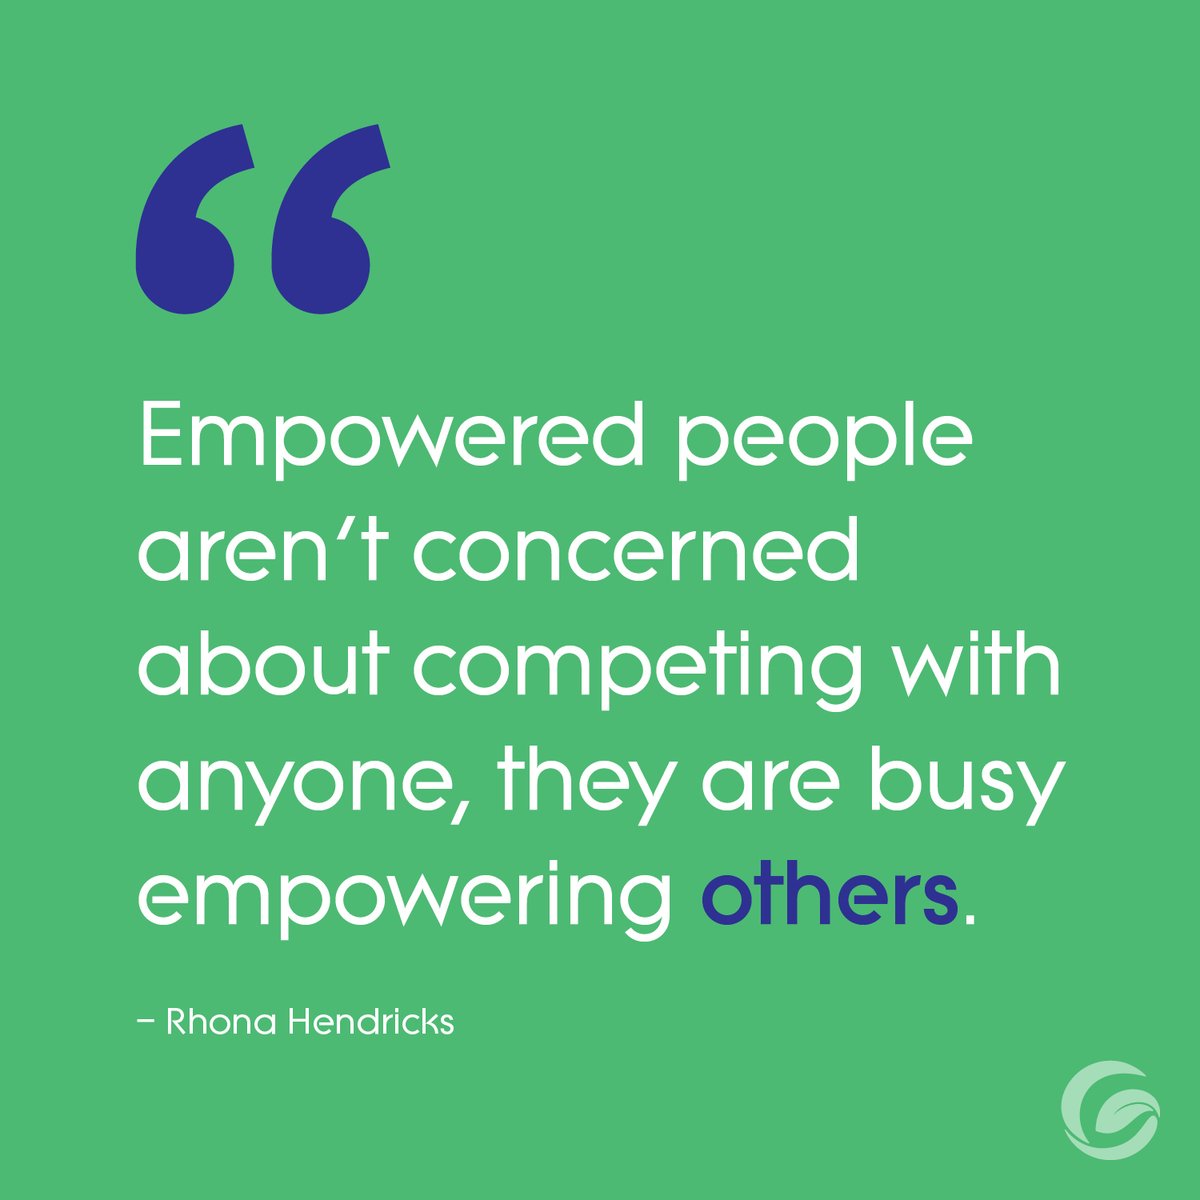 Moving together as one is important for continued success!

#Quote
#EmpoweredTogether
#GratoHoldings